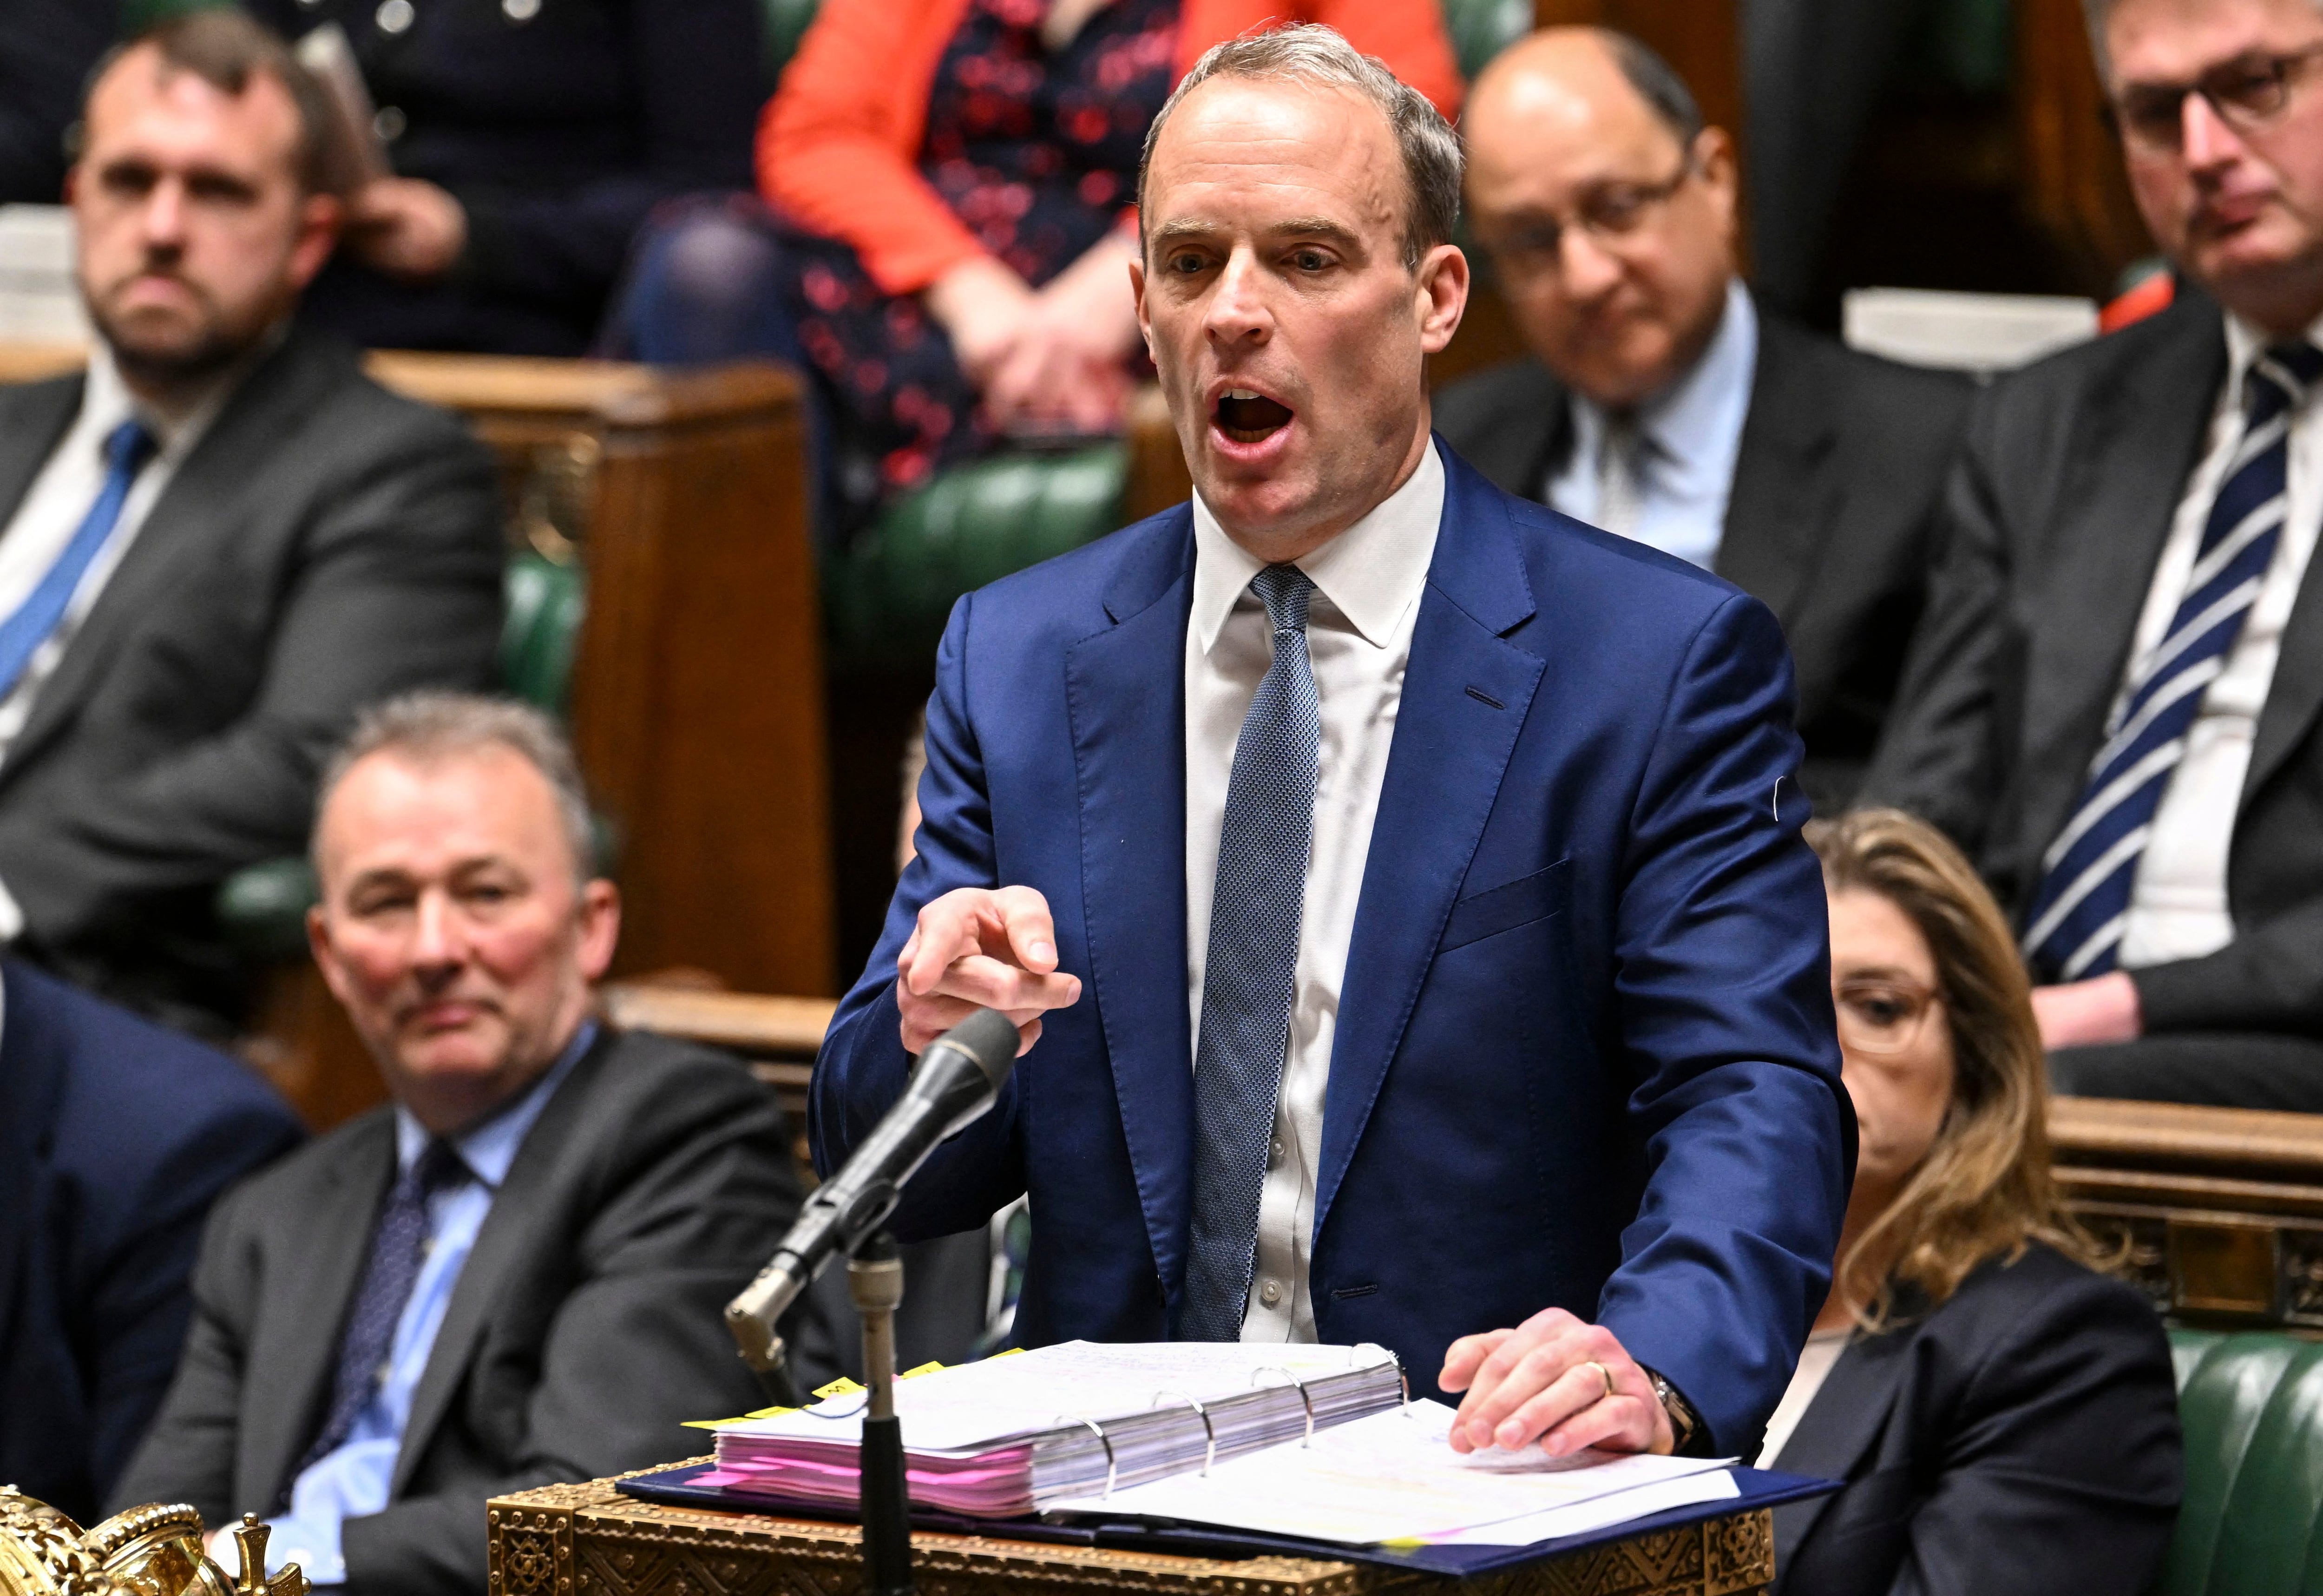 Raab, 49, was first elected to Parliament in 2010 and has held senior government posts, including Secretary for Justice and Foreign Affairs.  (Photo: AFP)